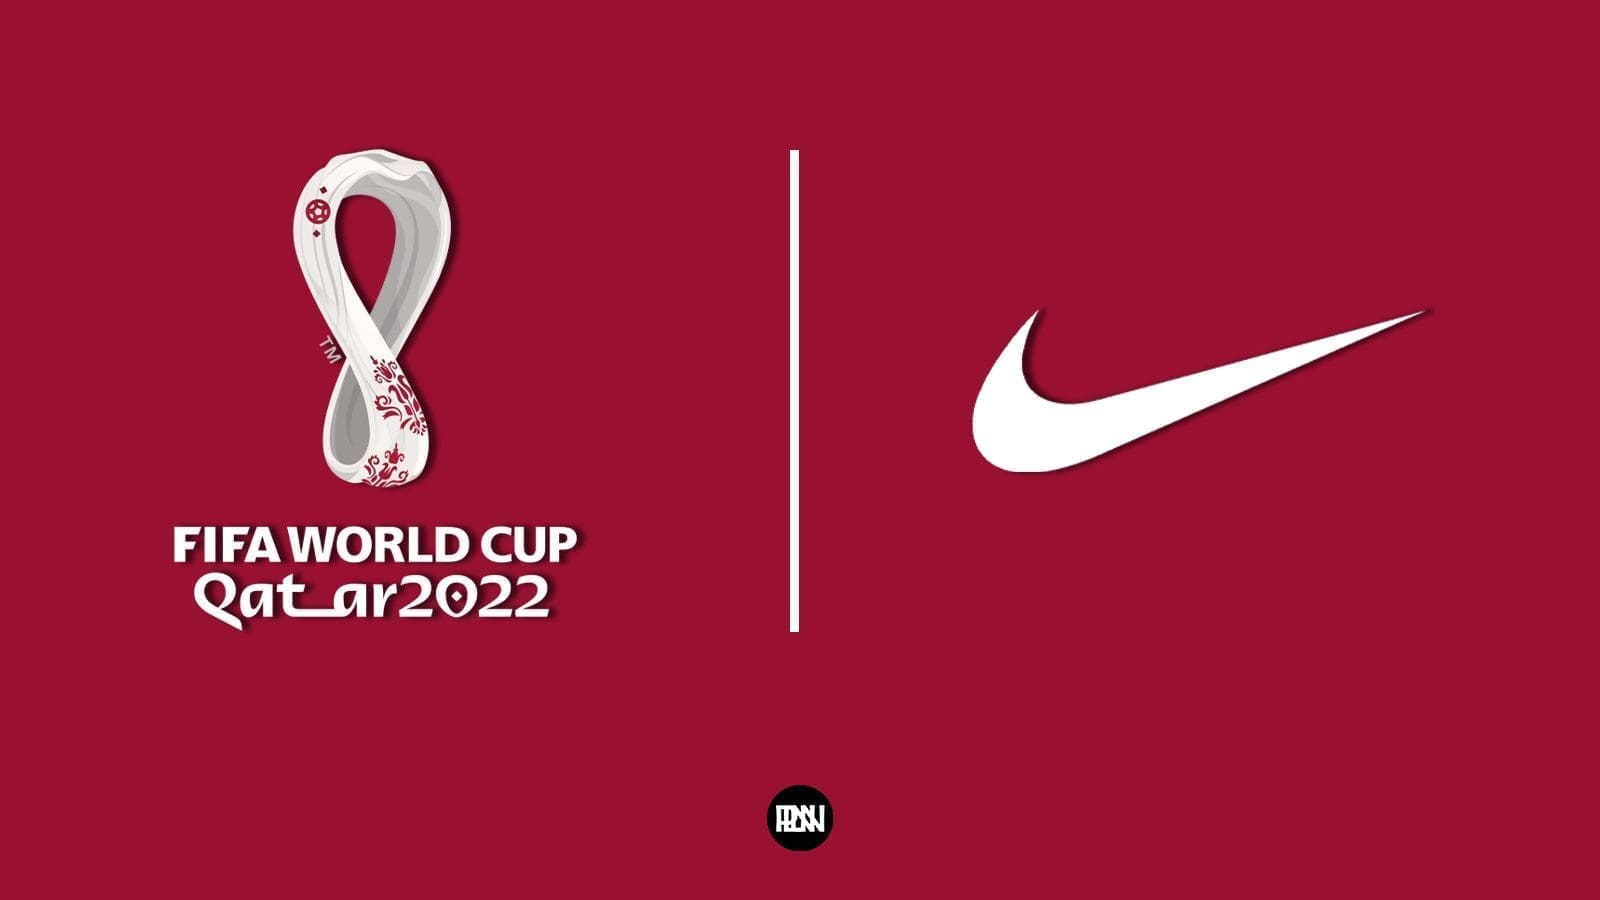 nike-2022-fifa-world-cup-home-away-kits-released